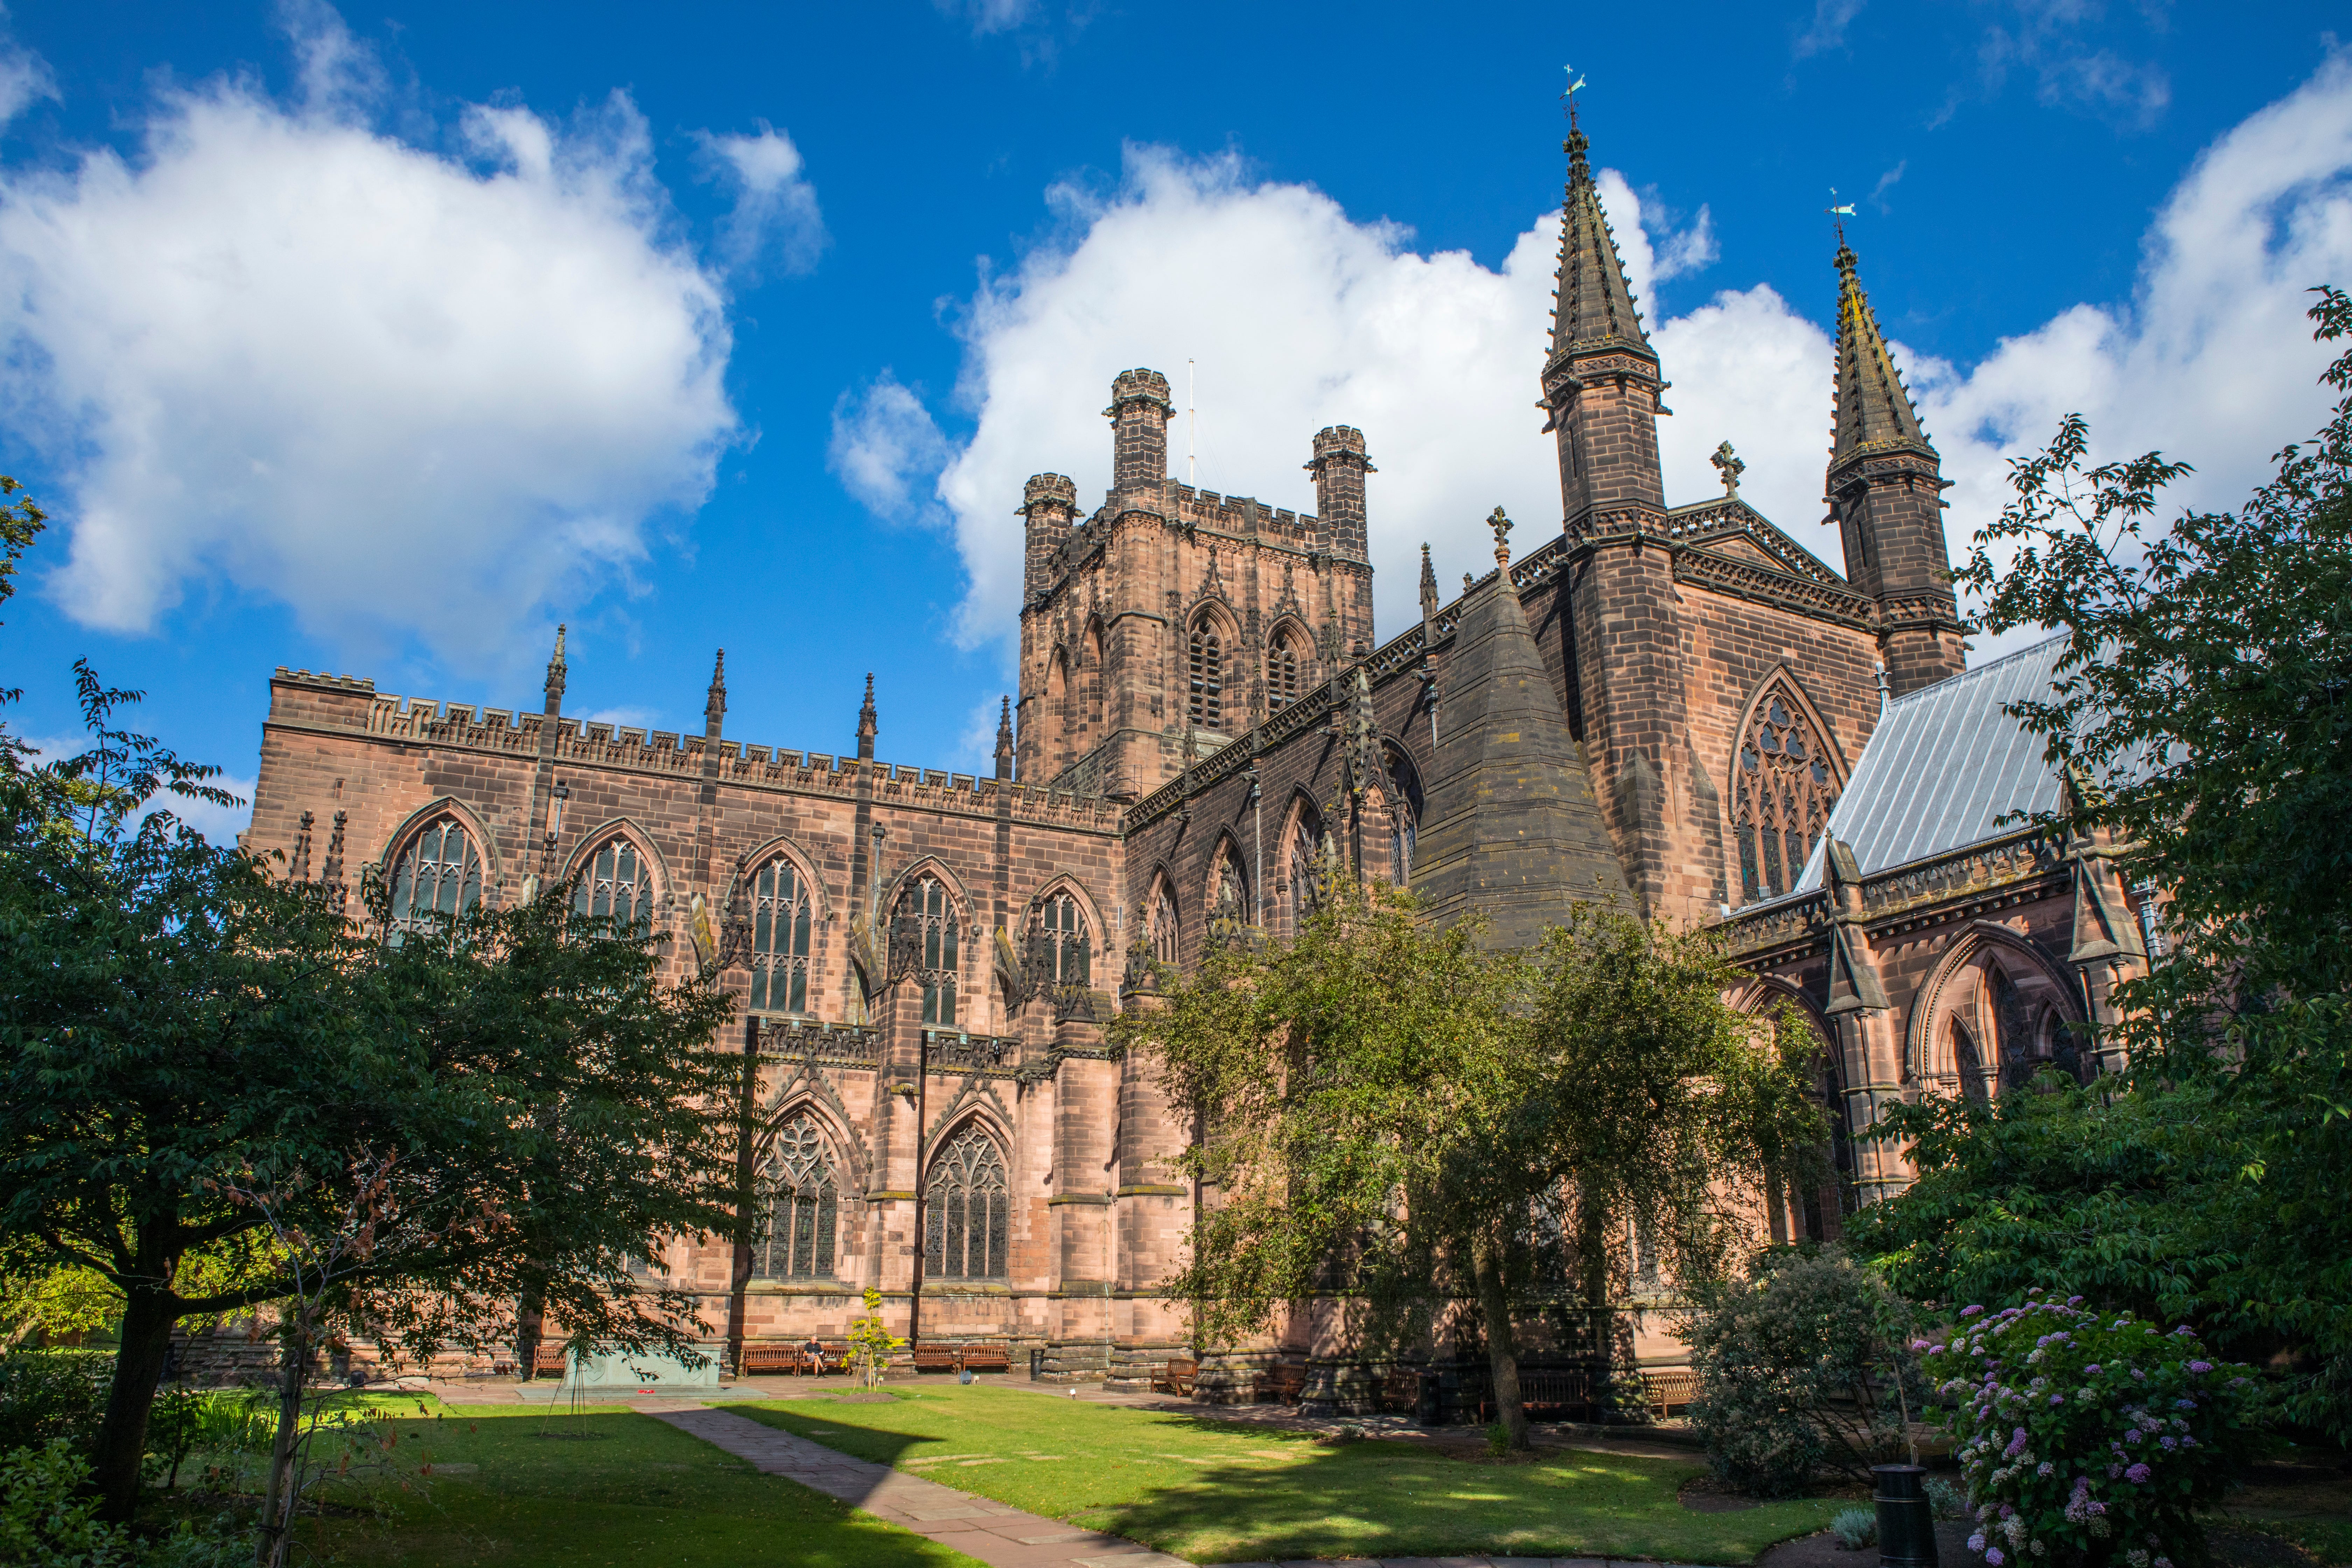 A view of the magnificent Chester Cathedral in the historic town of Chester in Cheshire, UK